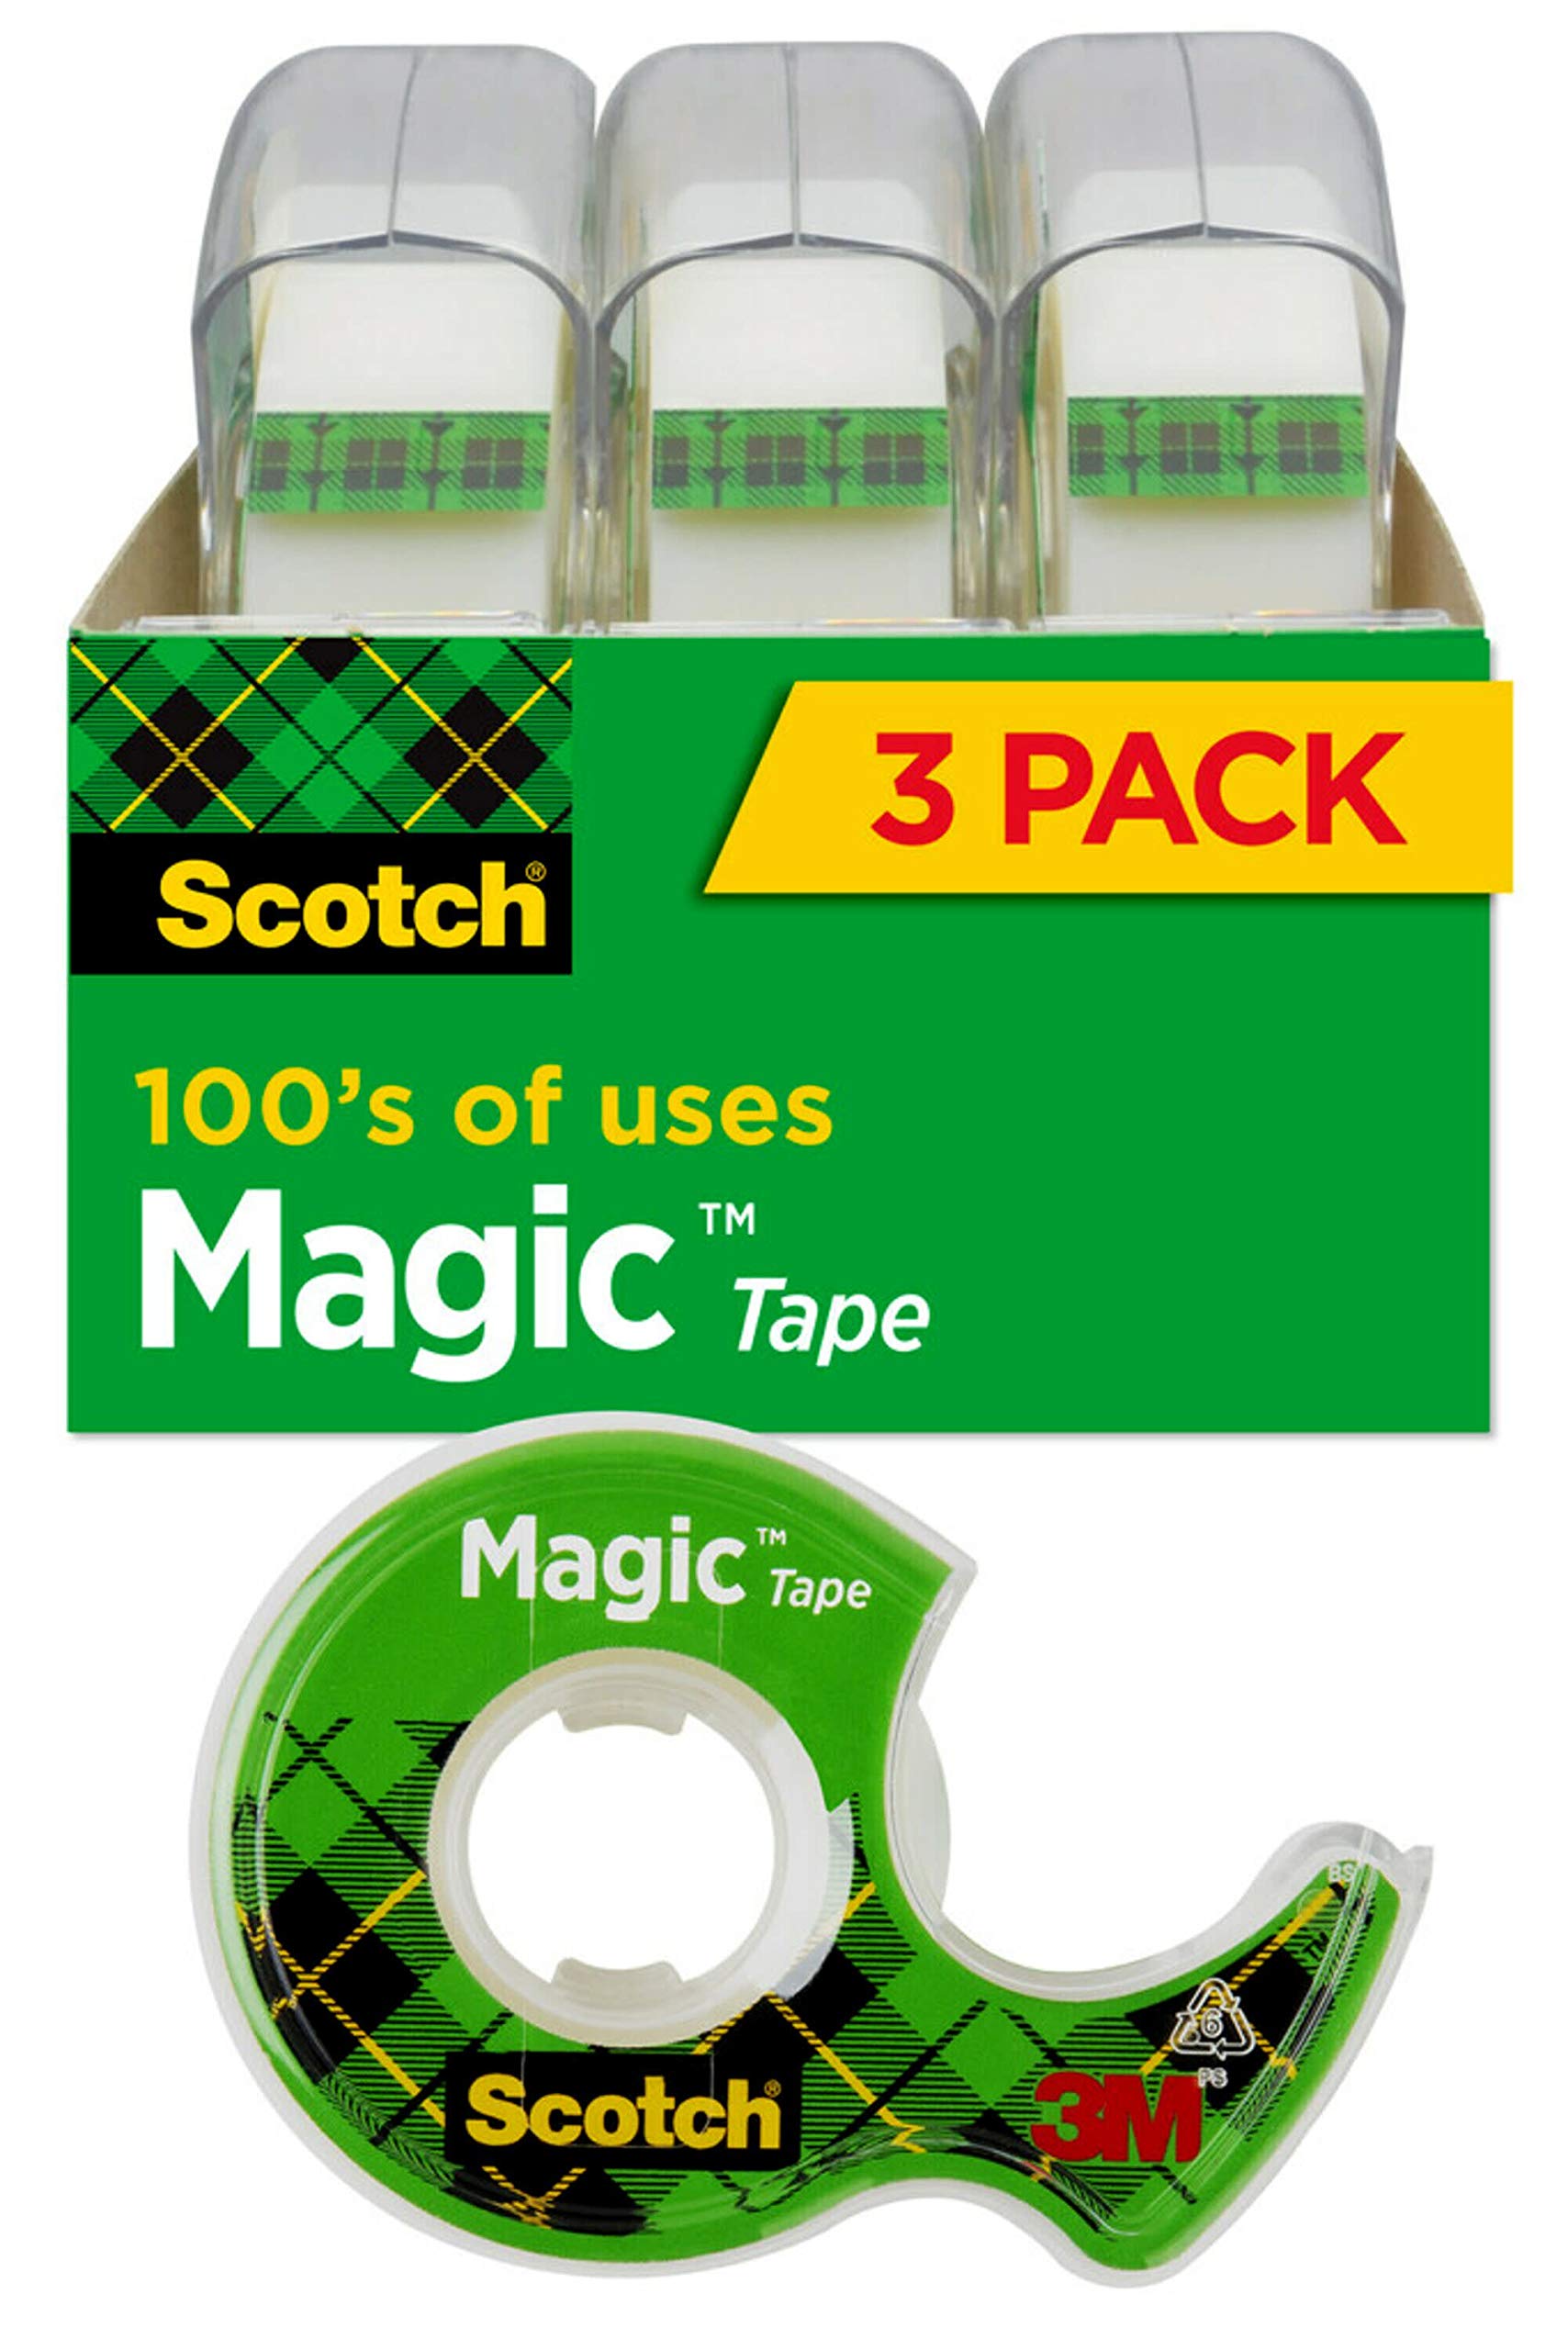 Scotch Gift Wrap Tape with Dispenser